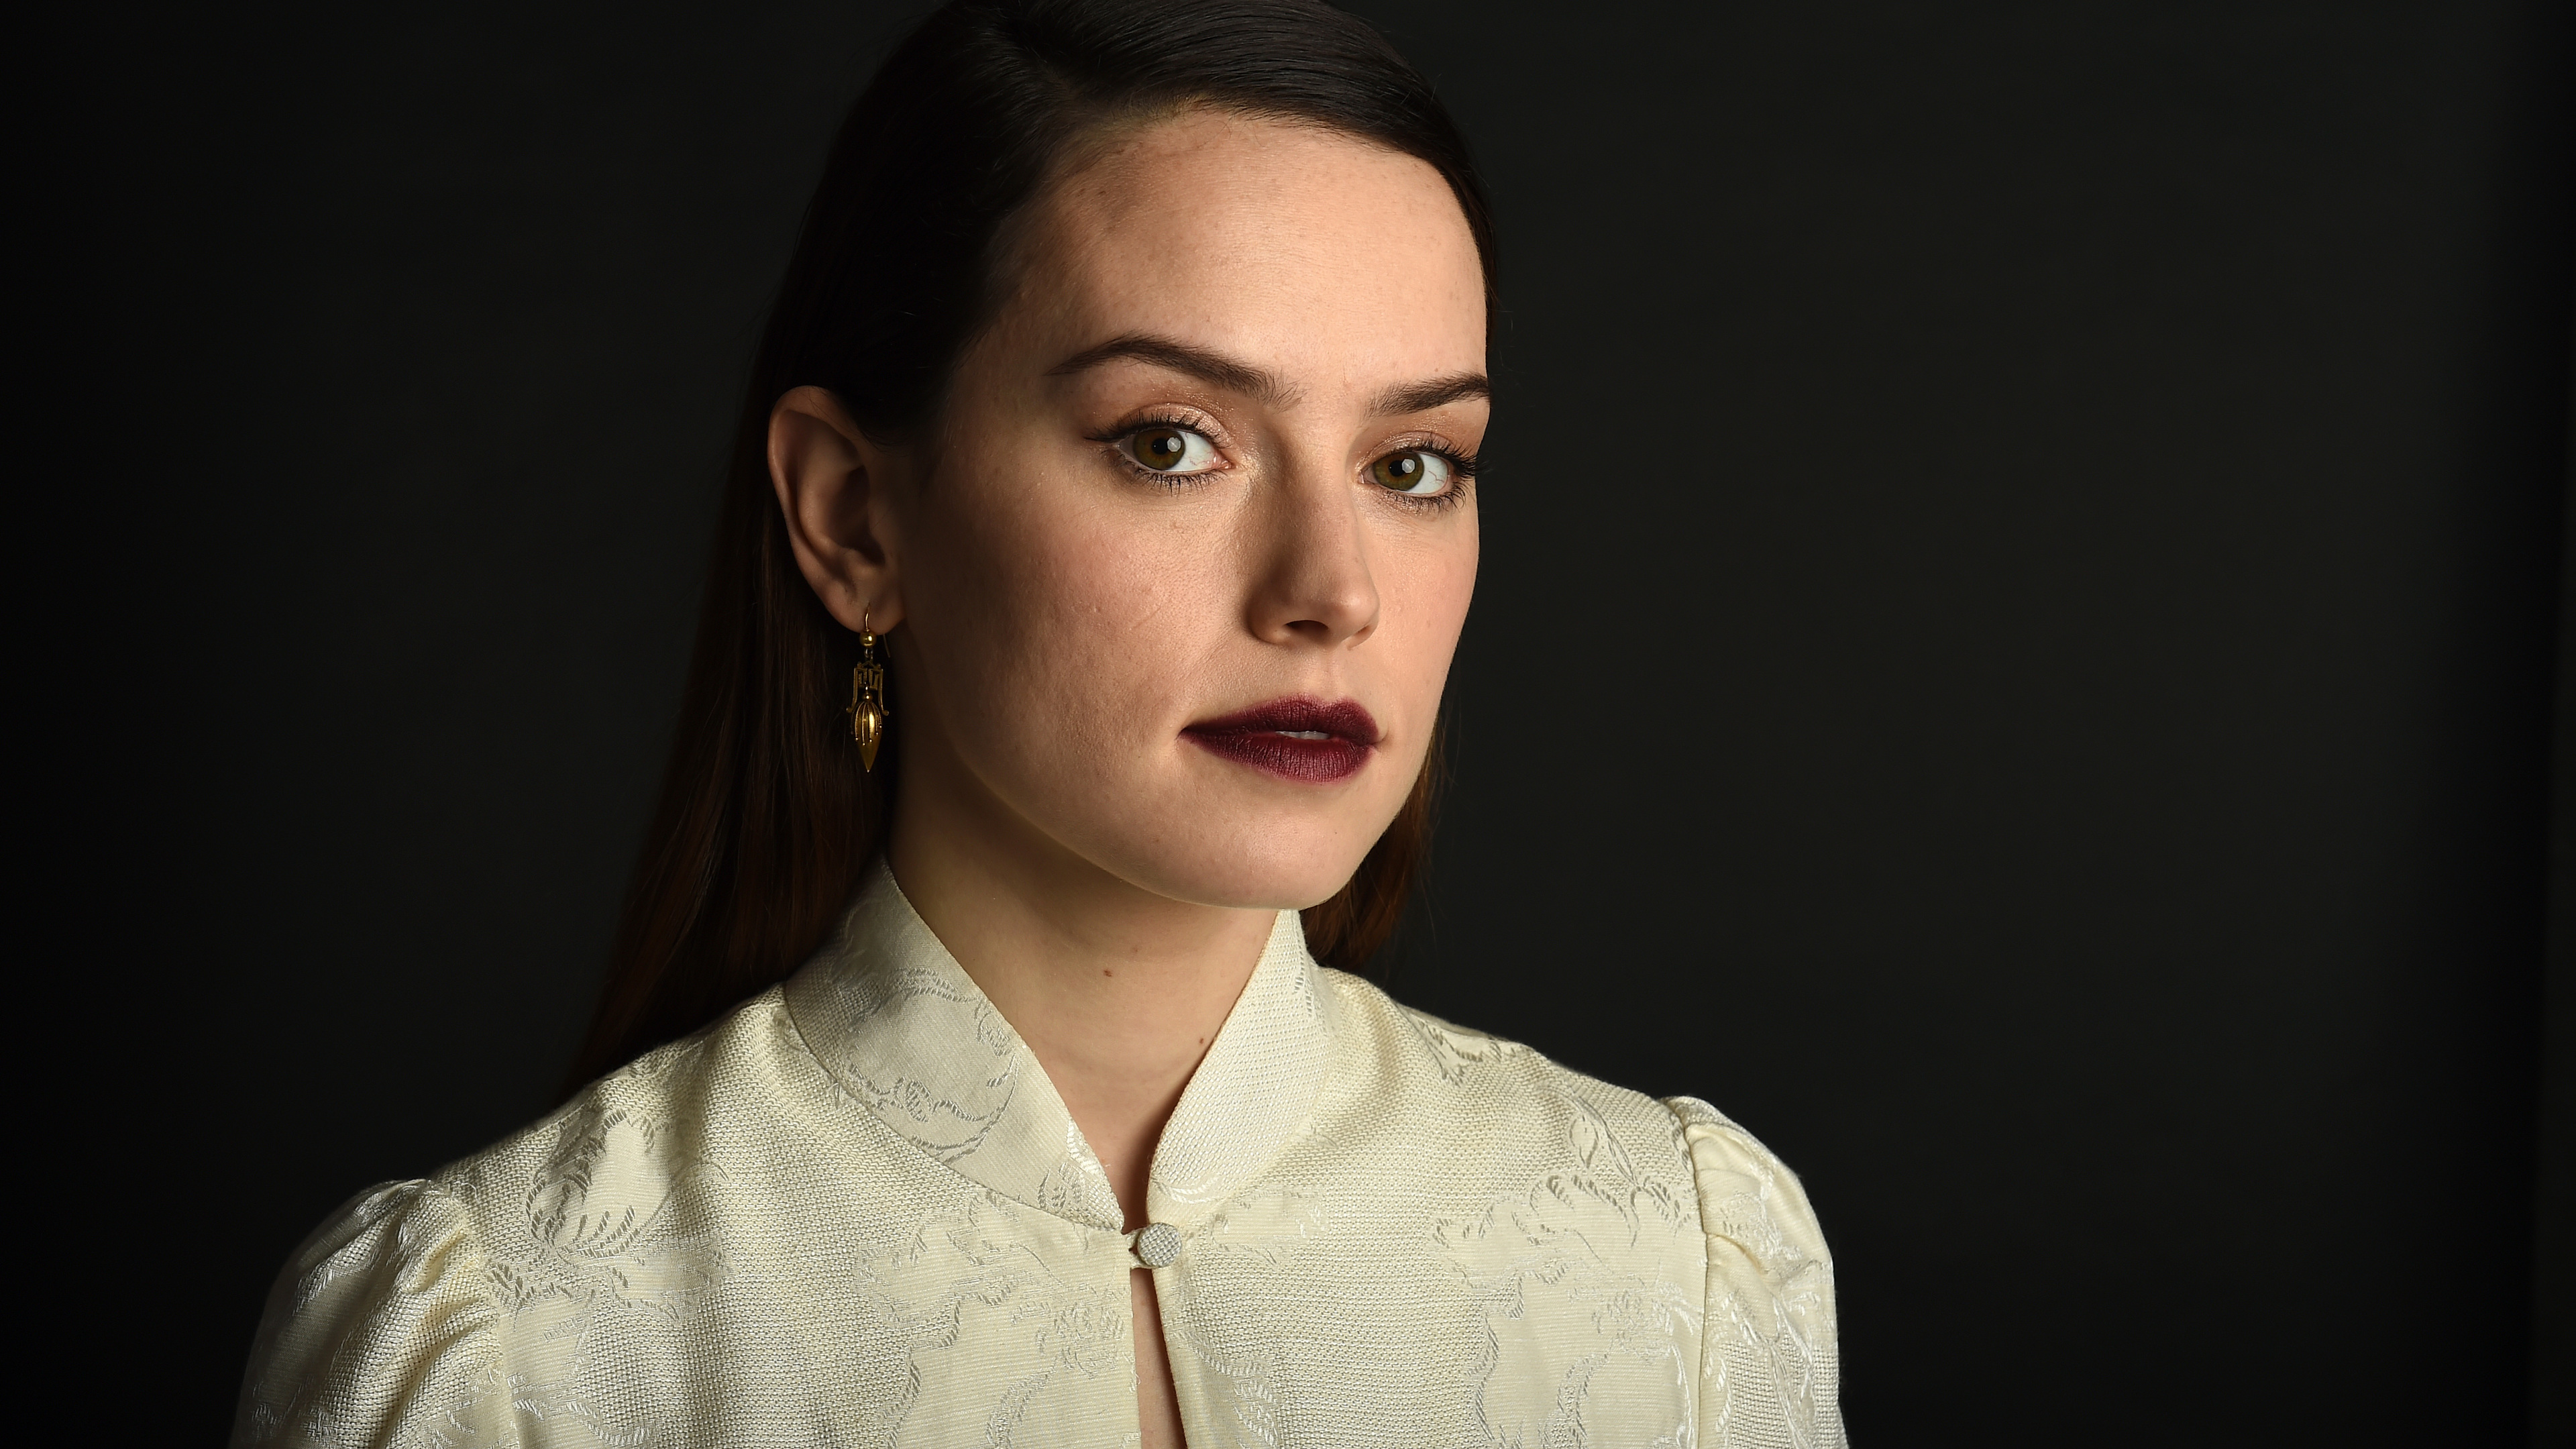 Daisy Ridley Face 2020 Wallpapers